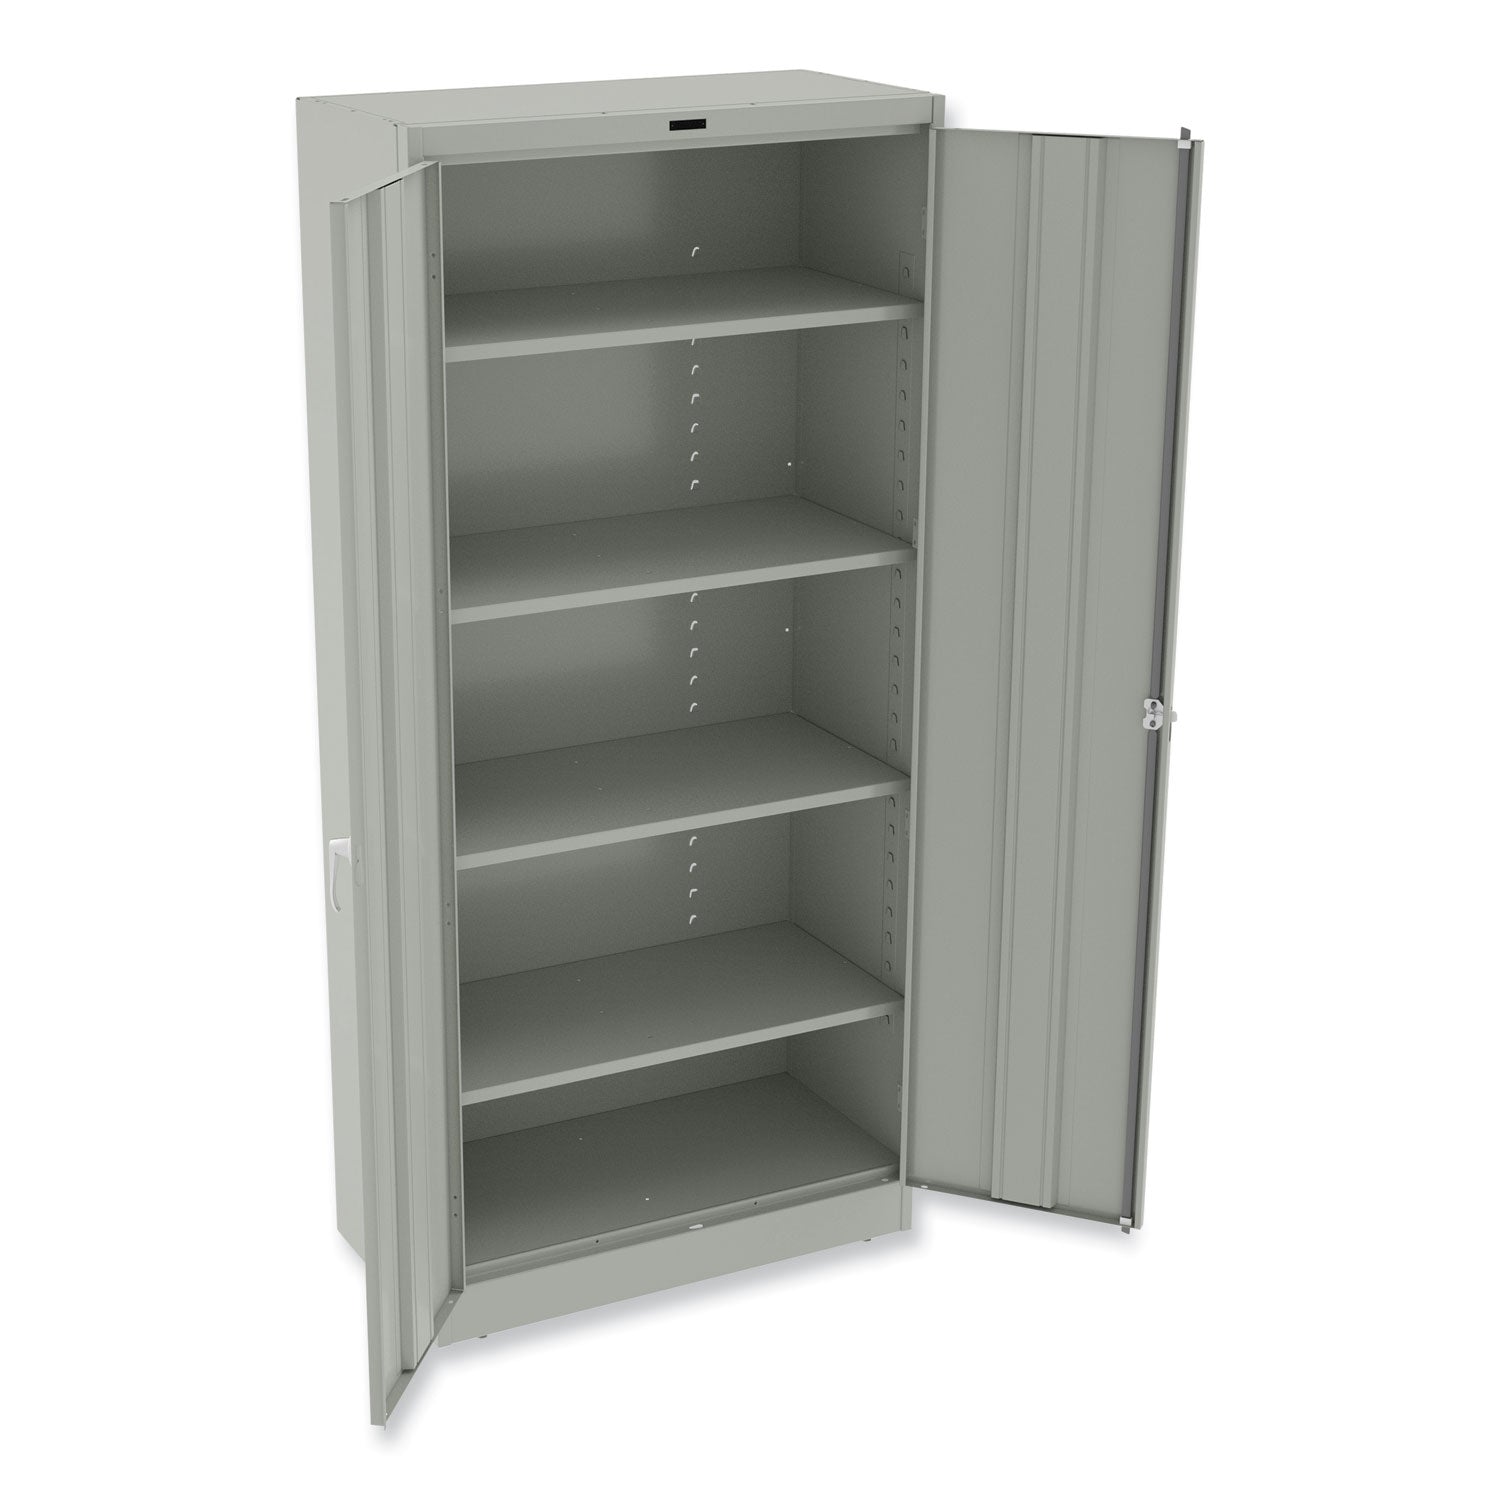 78" High Deluxe Cabinet, 36w x 18d x 78h, Light Gray - 